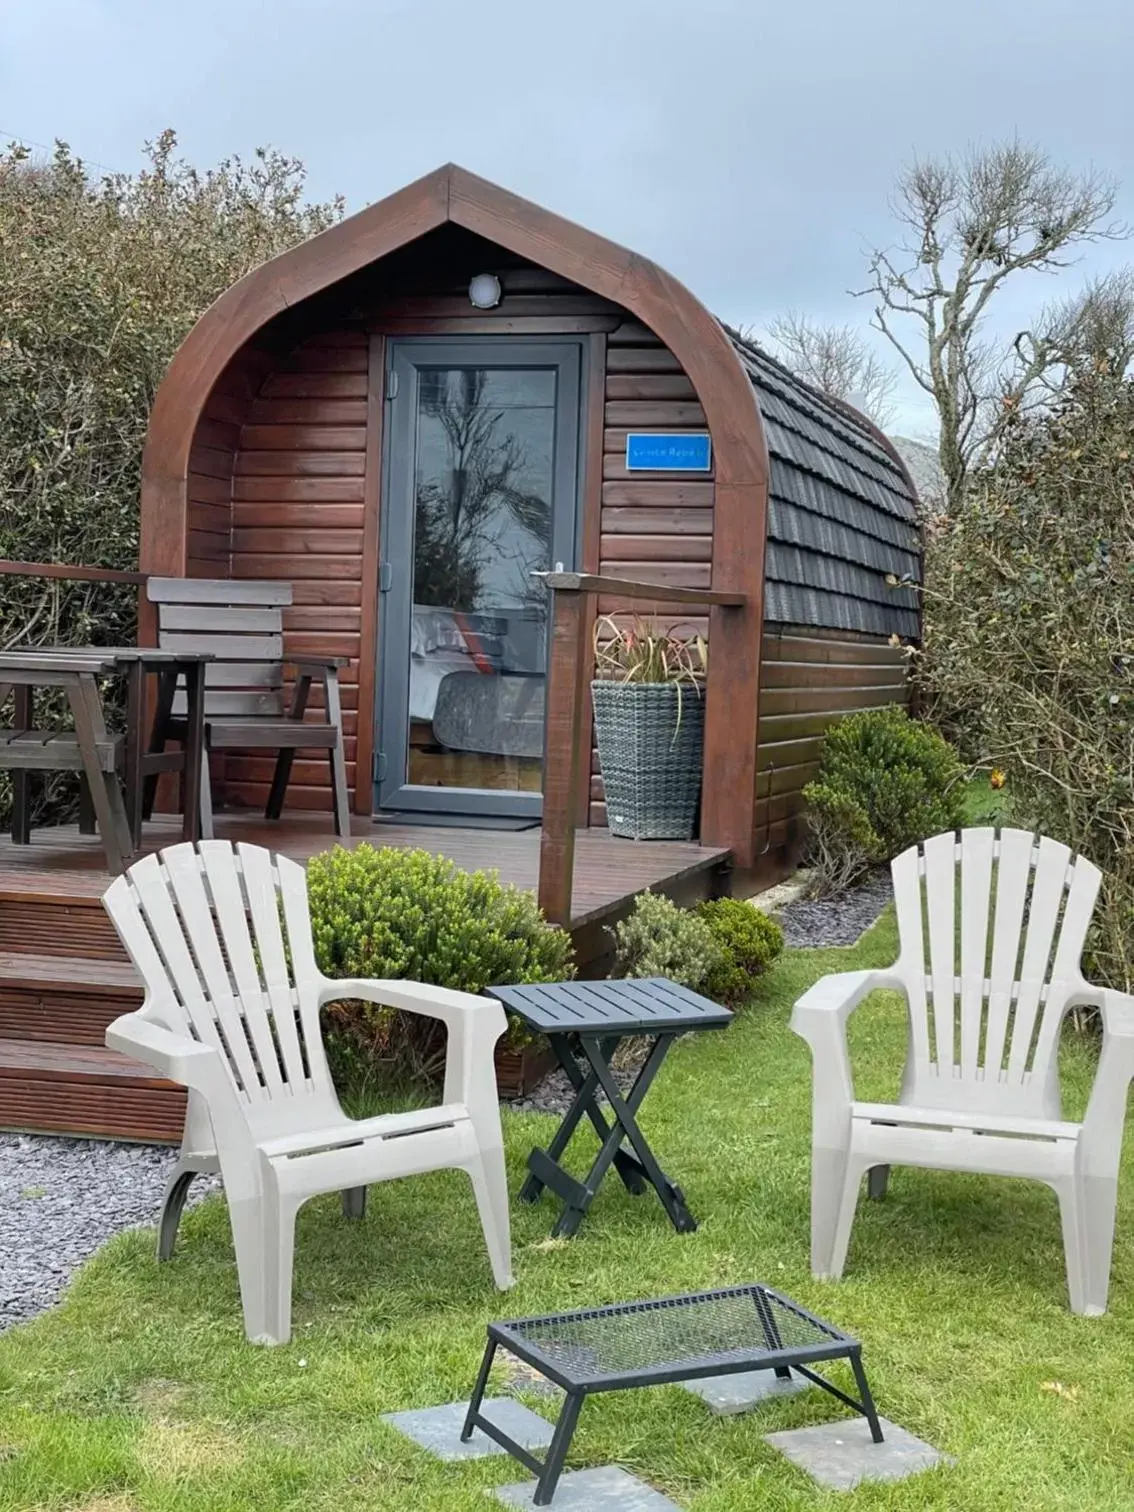 Property Building in Sea and Mountain View Luxury Glamping Pods Heated